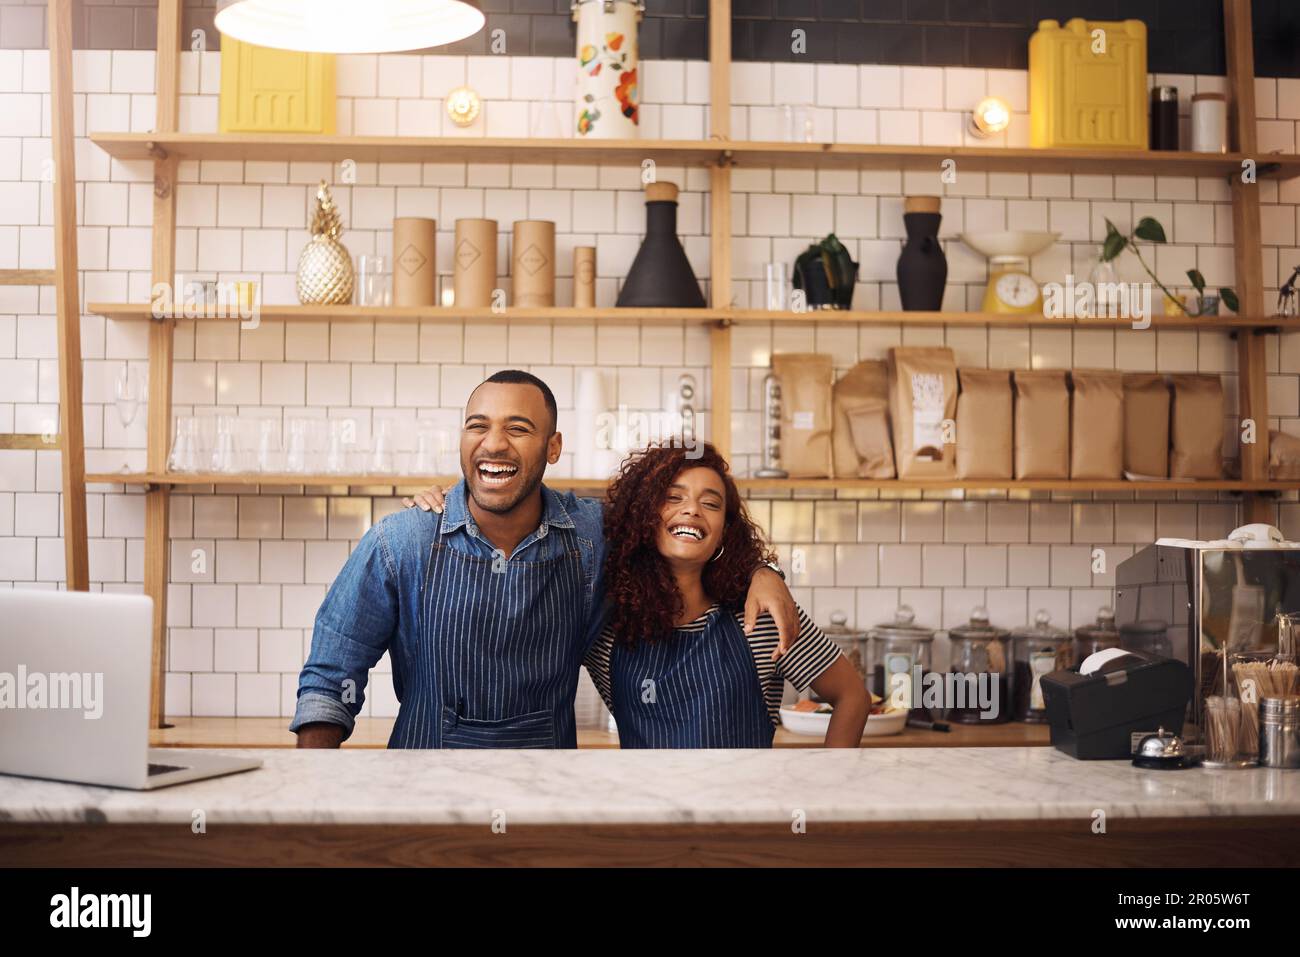 Look at what we created. two young business owners standing in their cafe with their arms around each other. Stock Photo